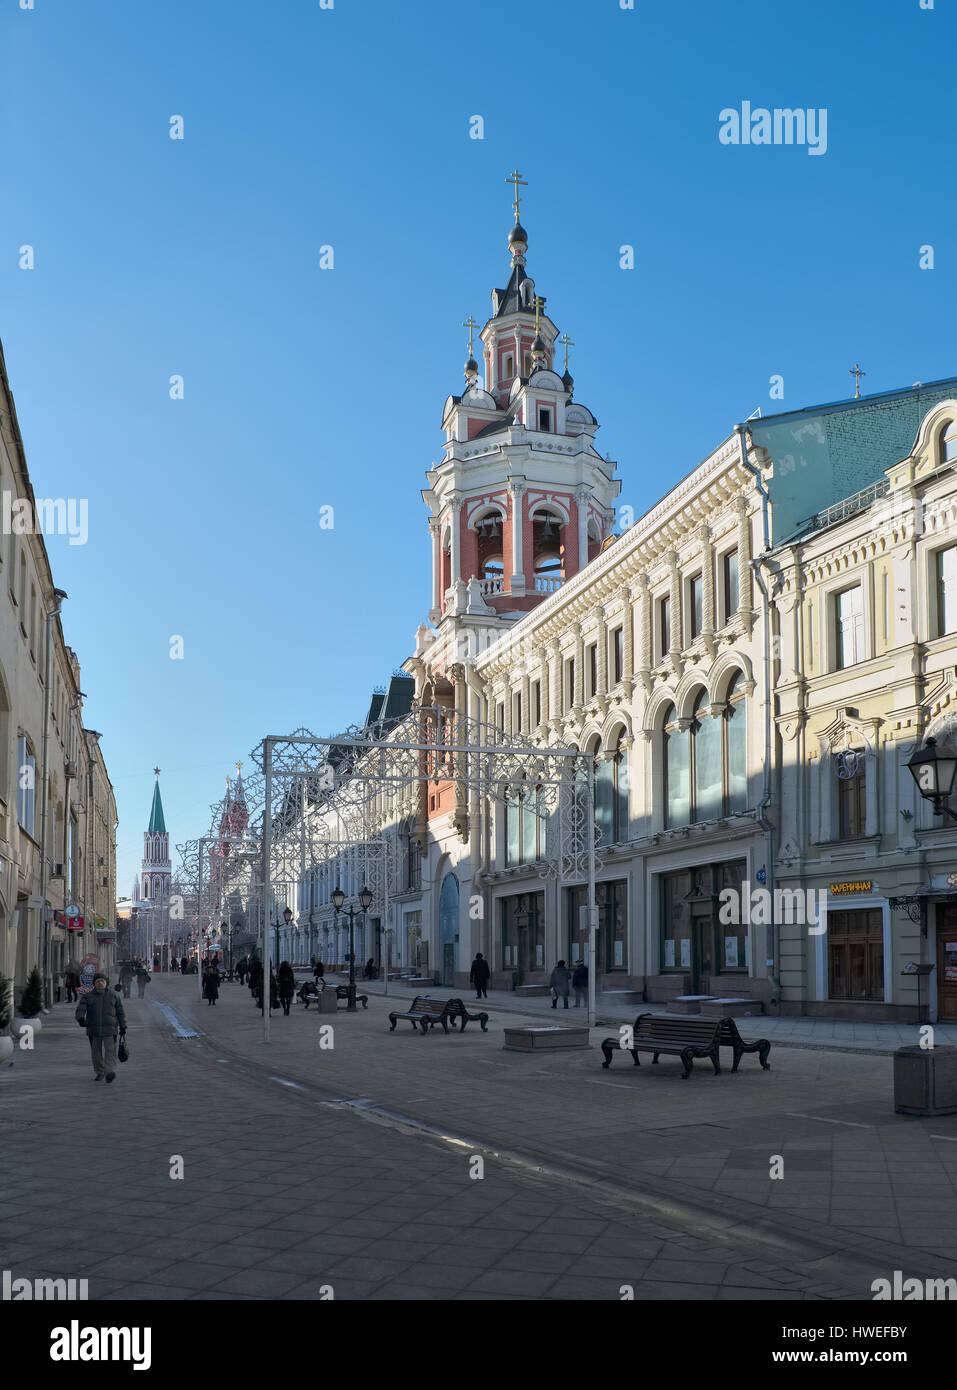 Nikolskaya Street in Moscow, view of the Spassky Cathedral of the Zaikonospassky Monastery, founded in the 15th ce Stock Photo